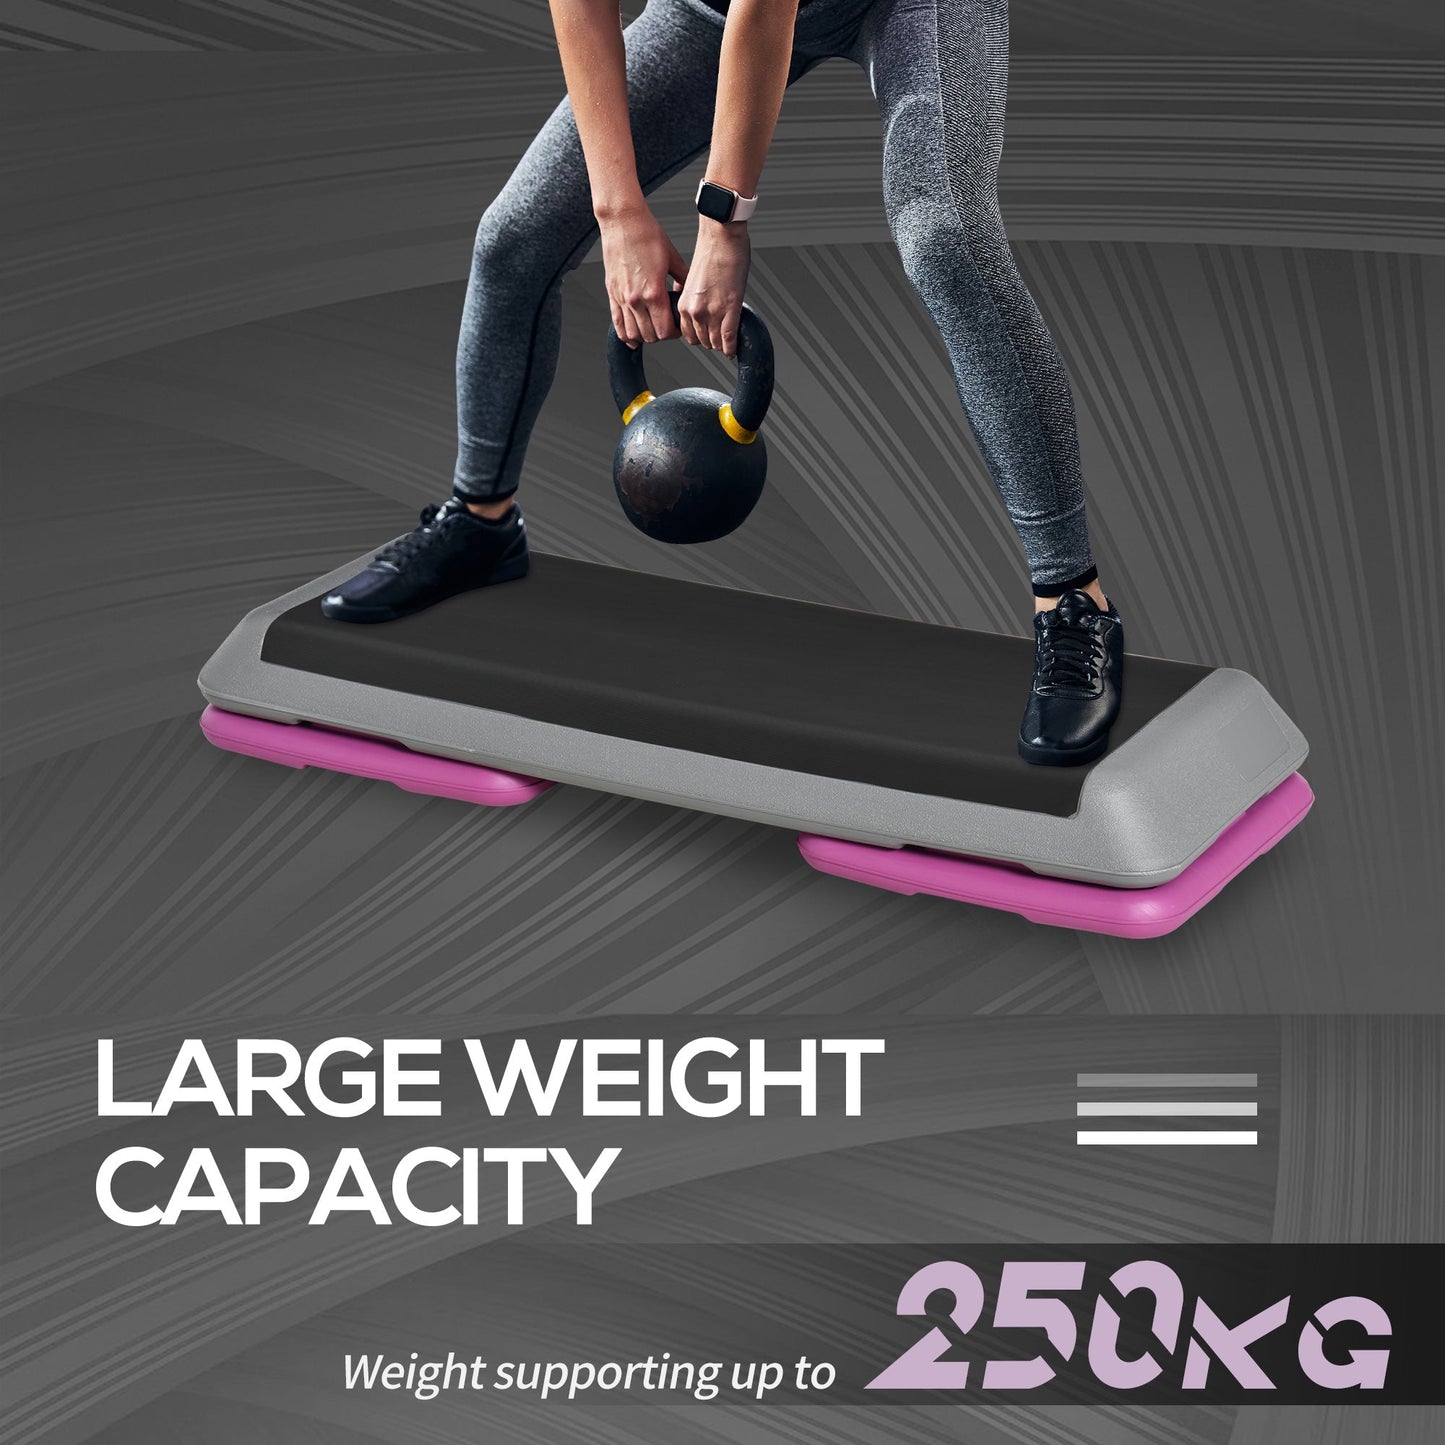 43" Adjustable Aerobic Platform Stepper 3 Level with Risers 4” 6” 8” Cardio Fitness Trainer Workout Step Home Gym Exercise, Black Purple at Gallery Canada